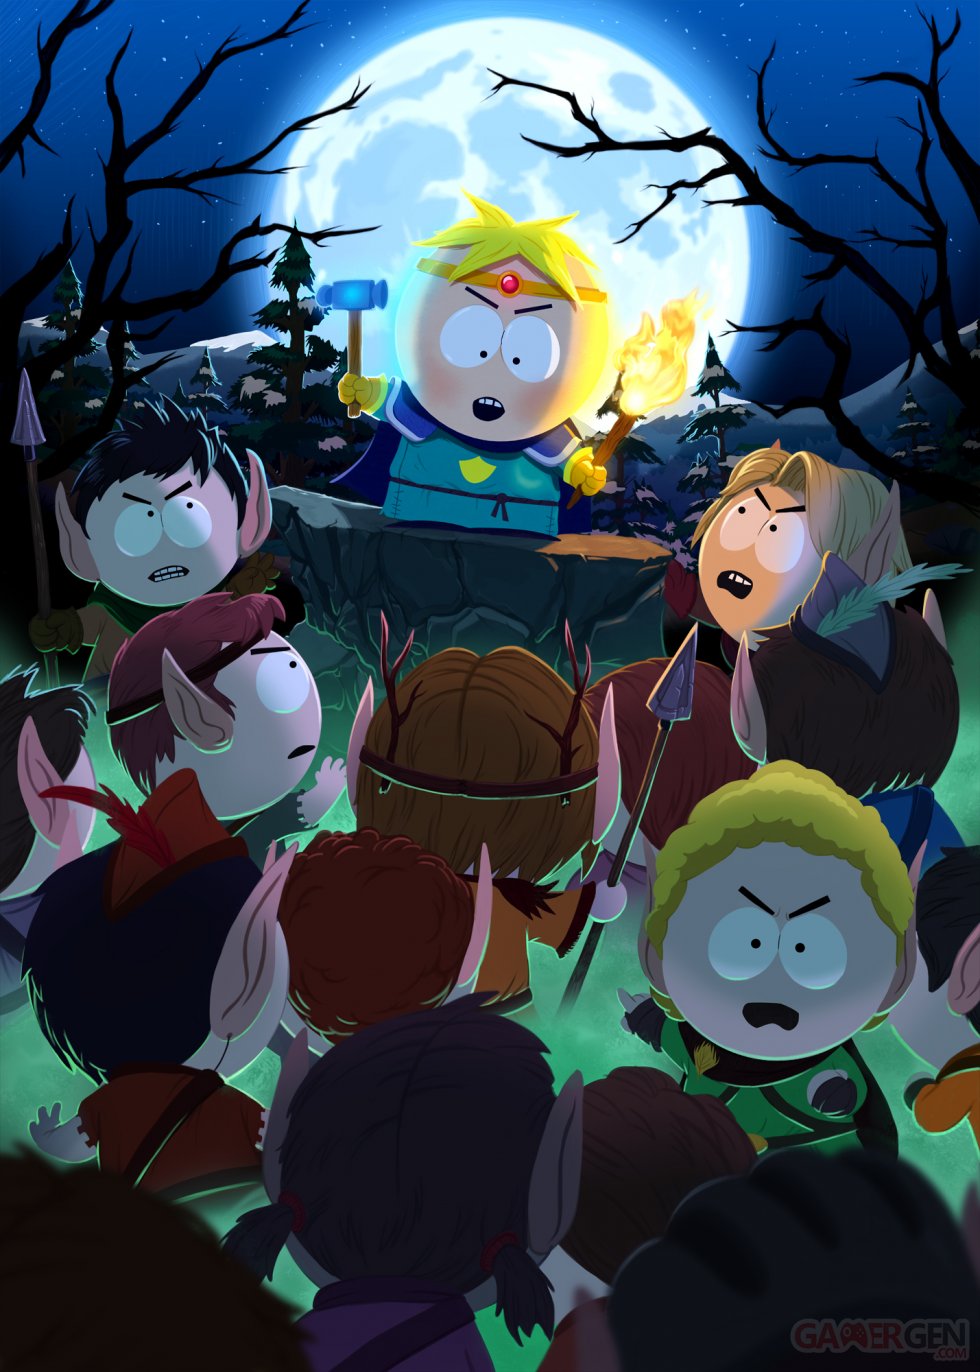 South-Park-The-Stick-of-Truth_15-02-2014_art-1